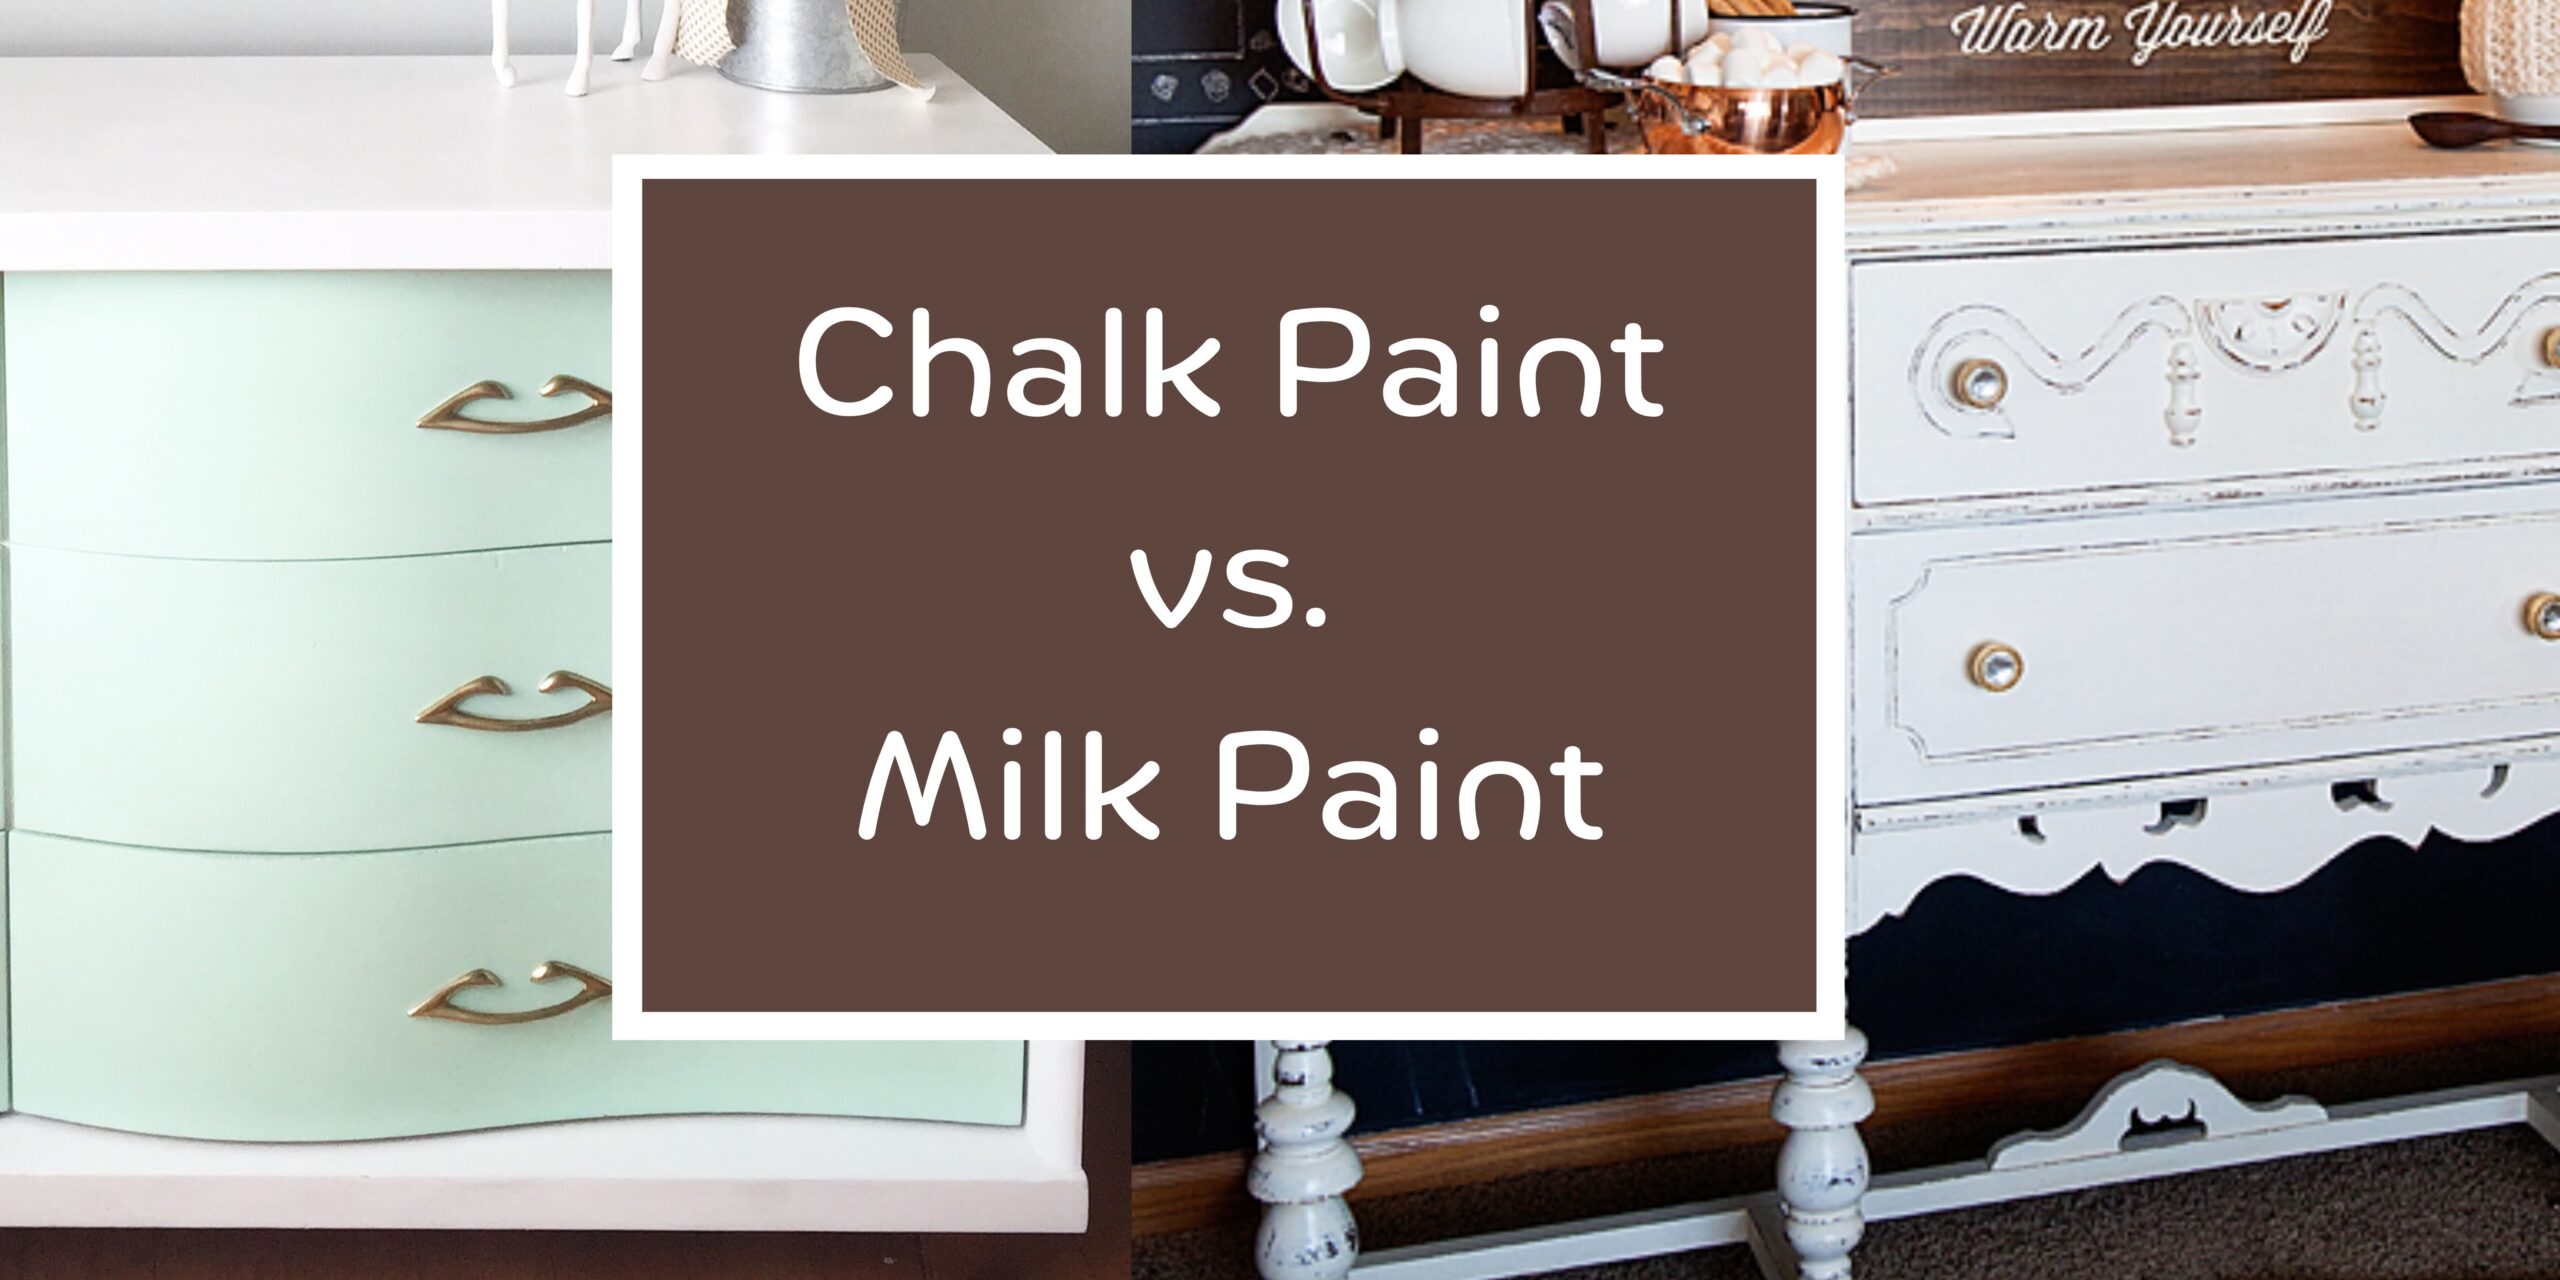 What Is Chalk Paint? Everything You Need to Know